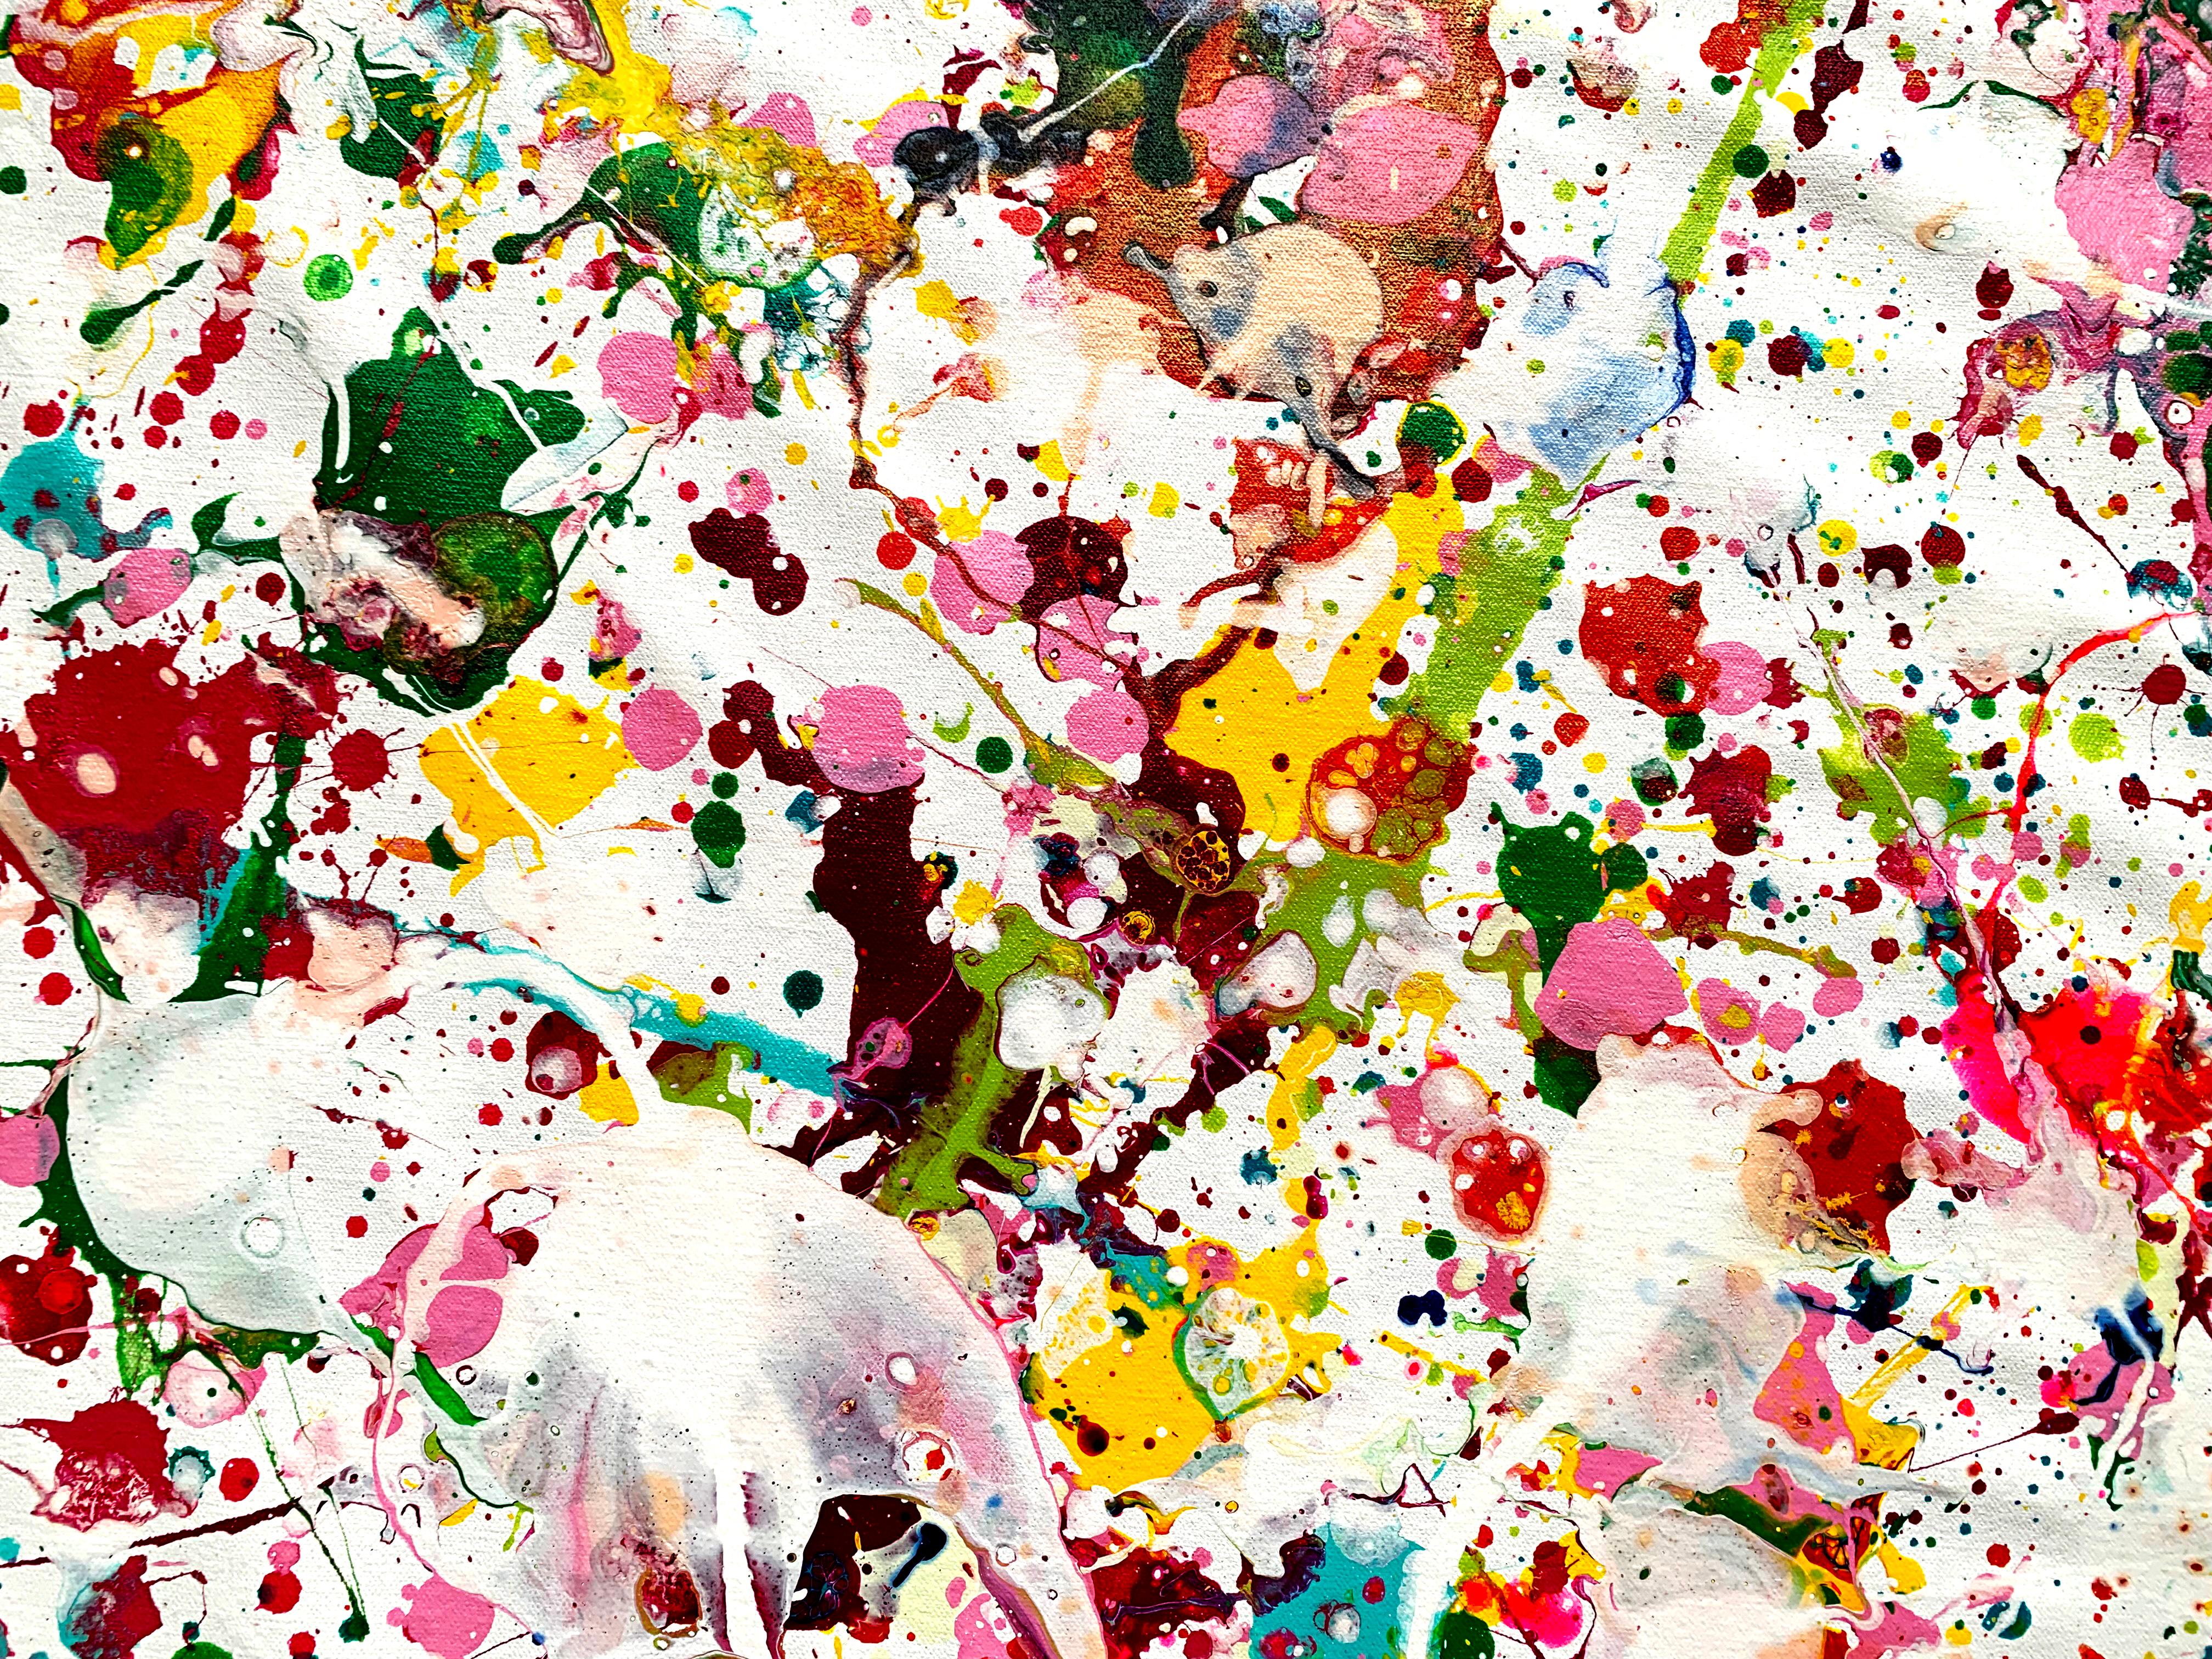 Sometimes a bubble just keeps getting bigger, and its not only bubbles but a whole host of things.. The work is in the style of abstract expressionism.

This artwork is painted on professional-grade canvas stretched and sealed with varnish. The